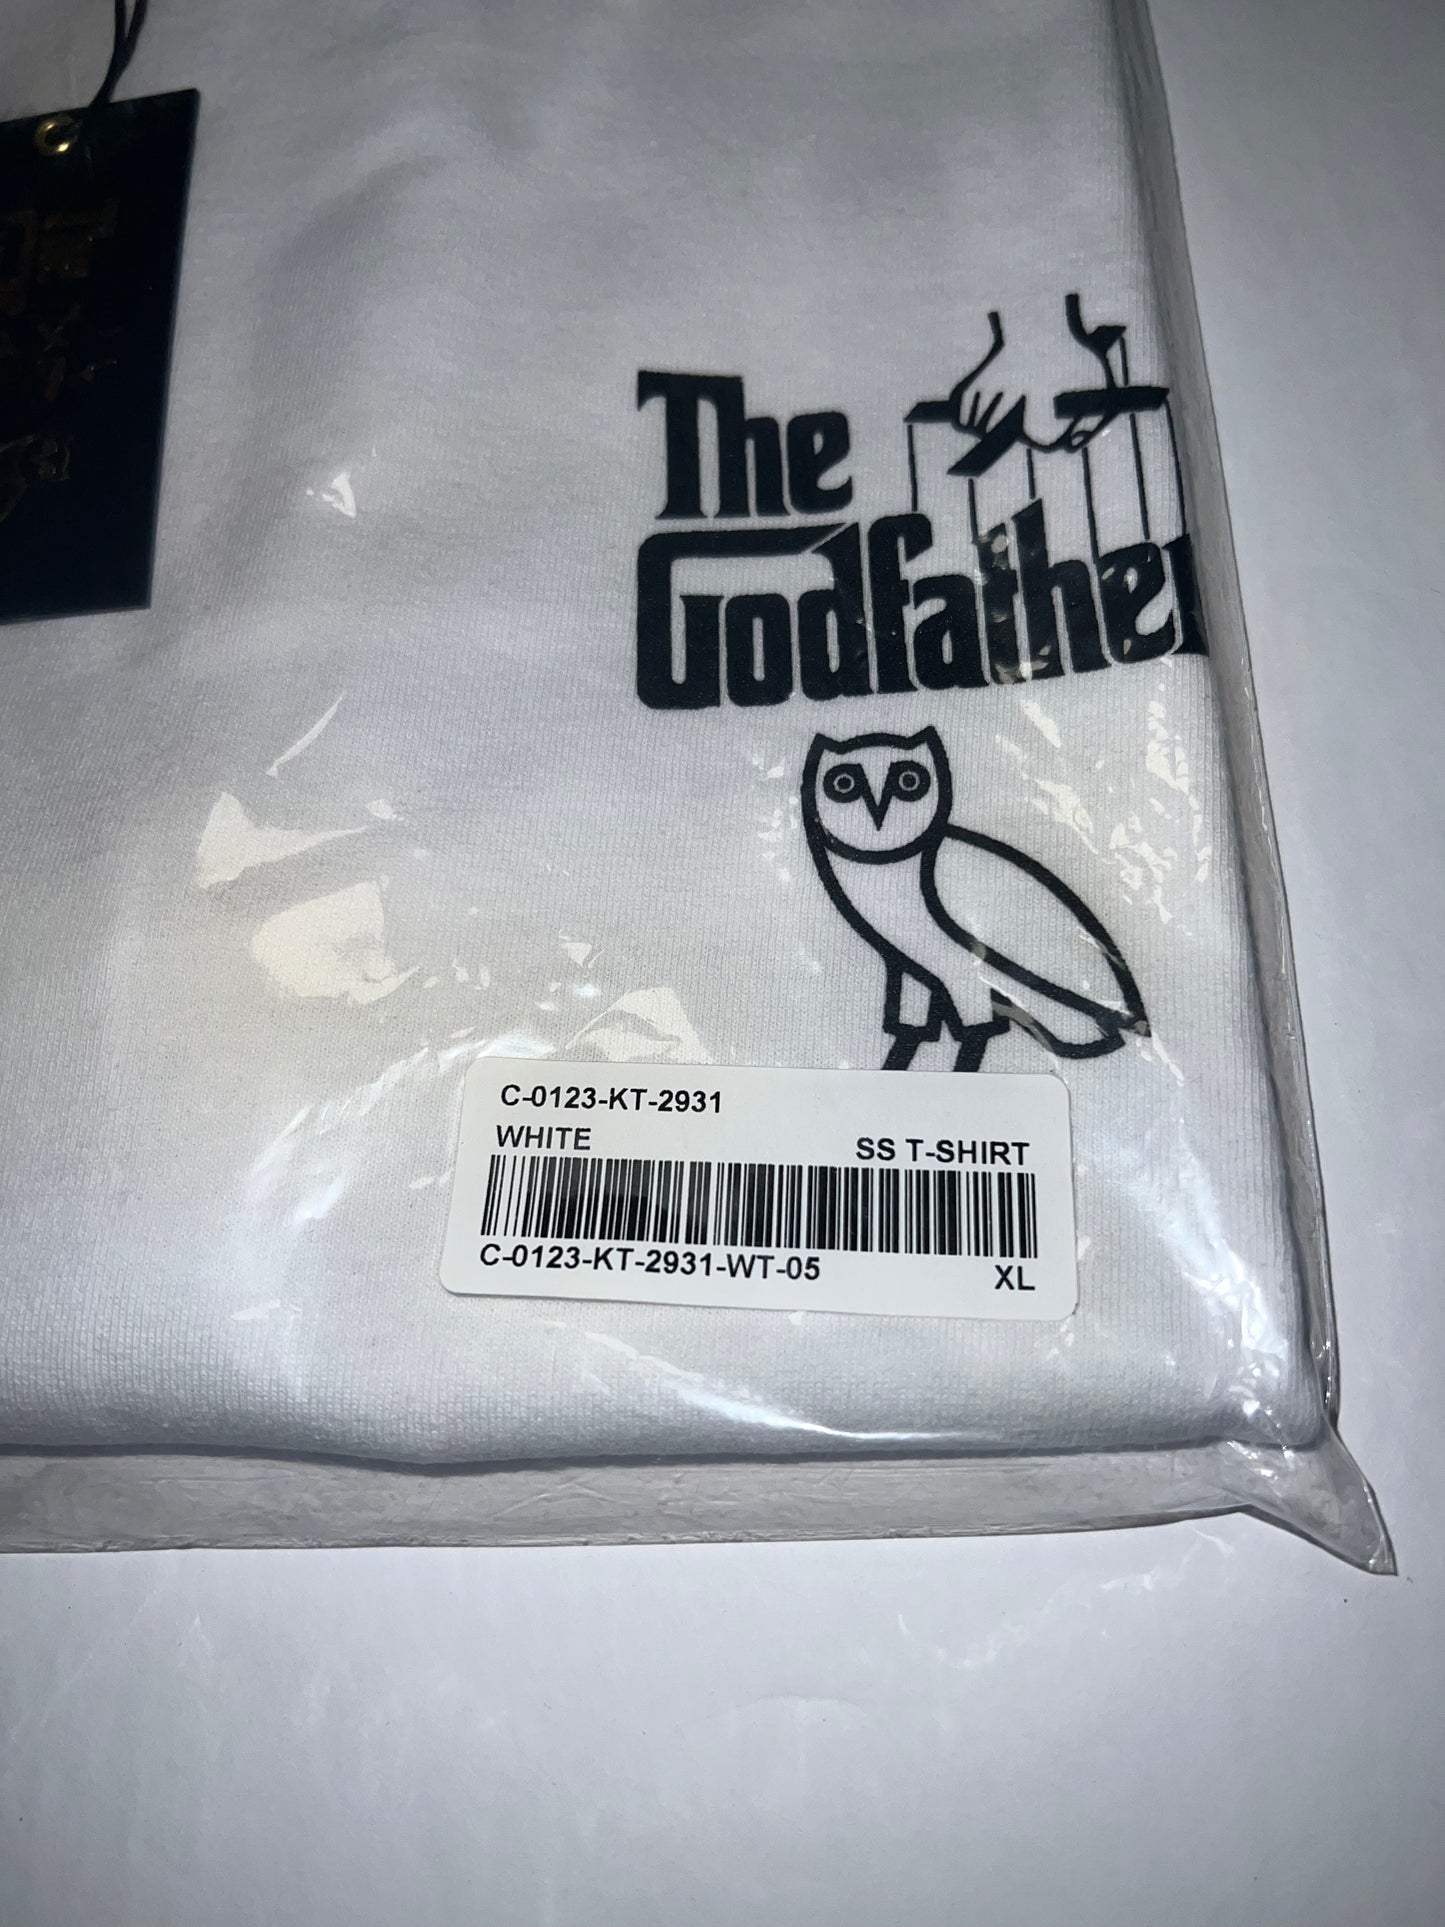 October’s Very Own x The Godfather T-shirt